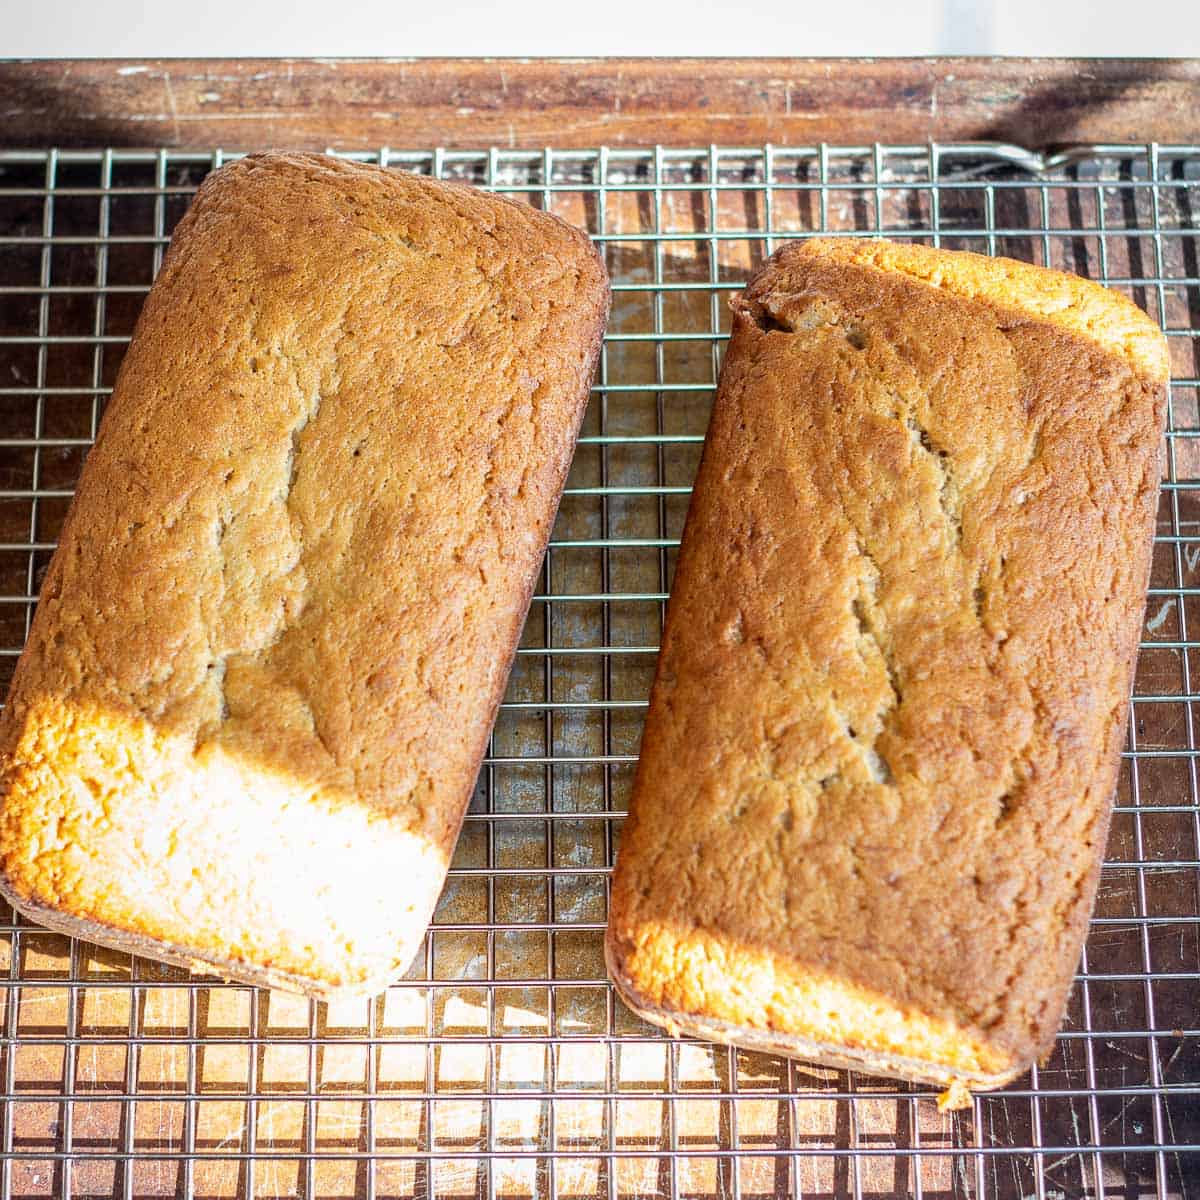 Freshly baked banana bread set to cool on wire rack.